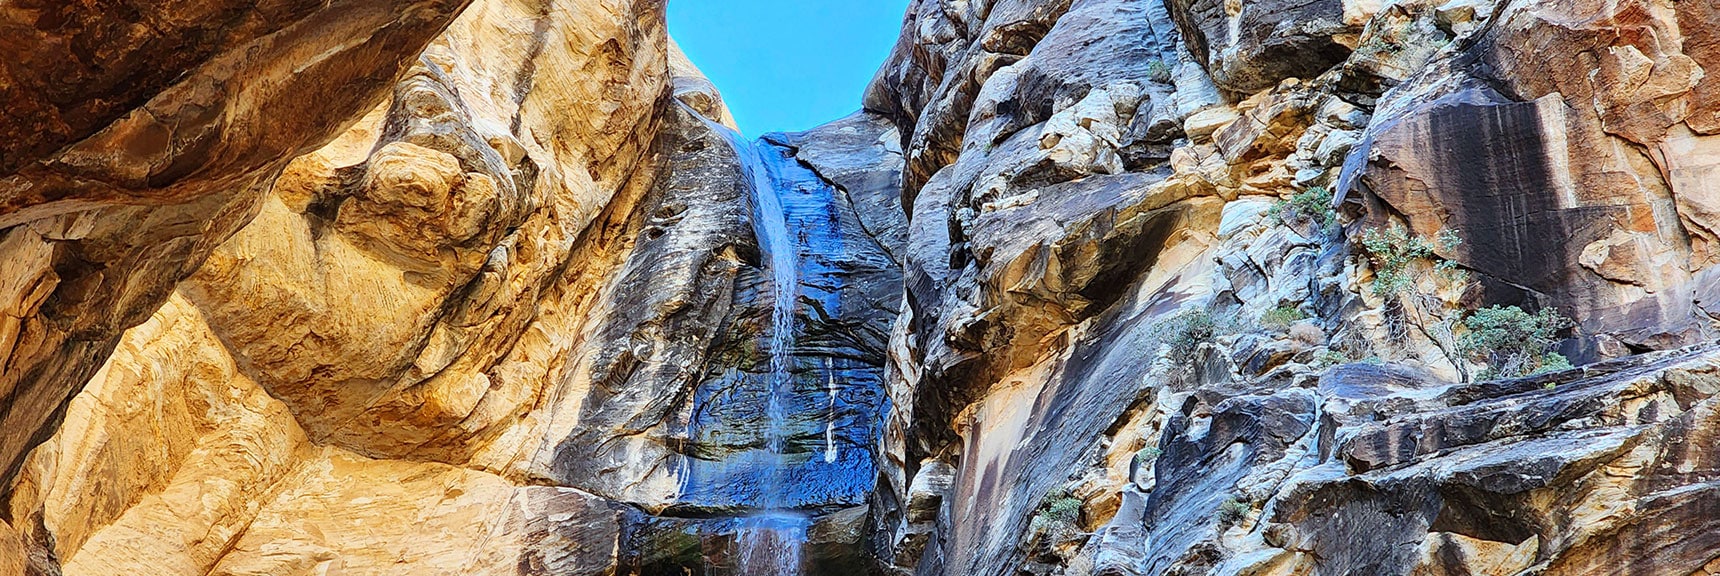 Upper Waterfall. Definite End to This Canyon Route for All But Expert Climbers | Ice Box Canyon | Red Rock Canyon NCA, Nevada | Las Vegas Area Trails | David Smith